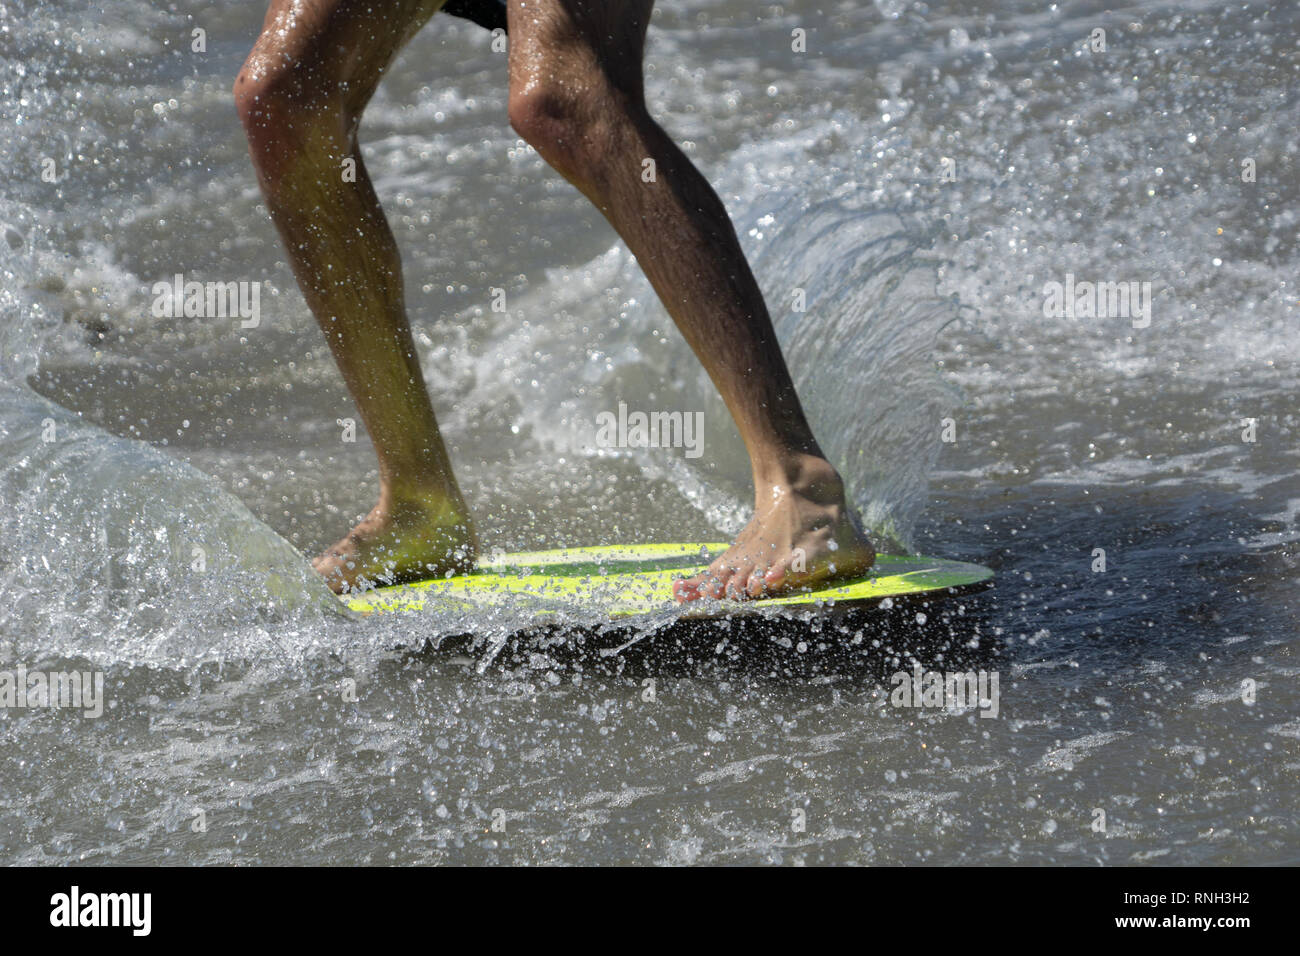 Skim-boarding mans legs close-up on yellow board in shallow water. Stock Photo